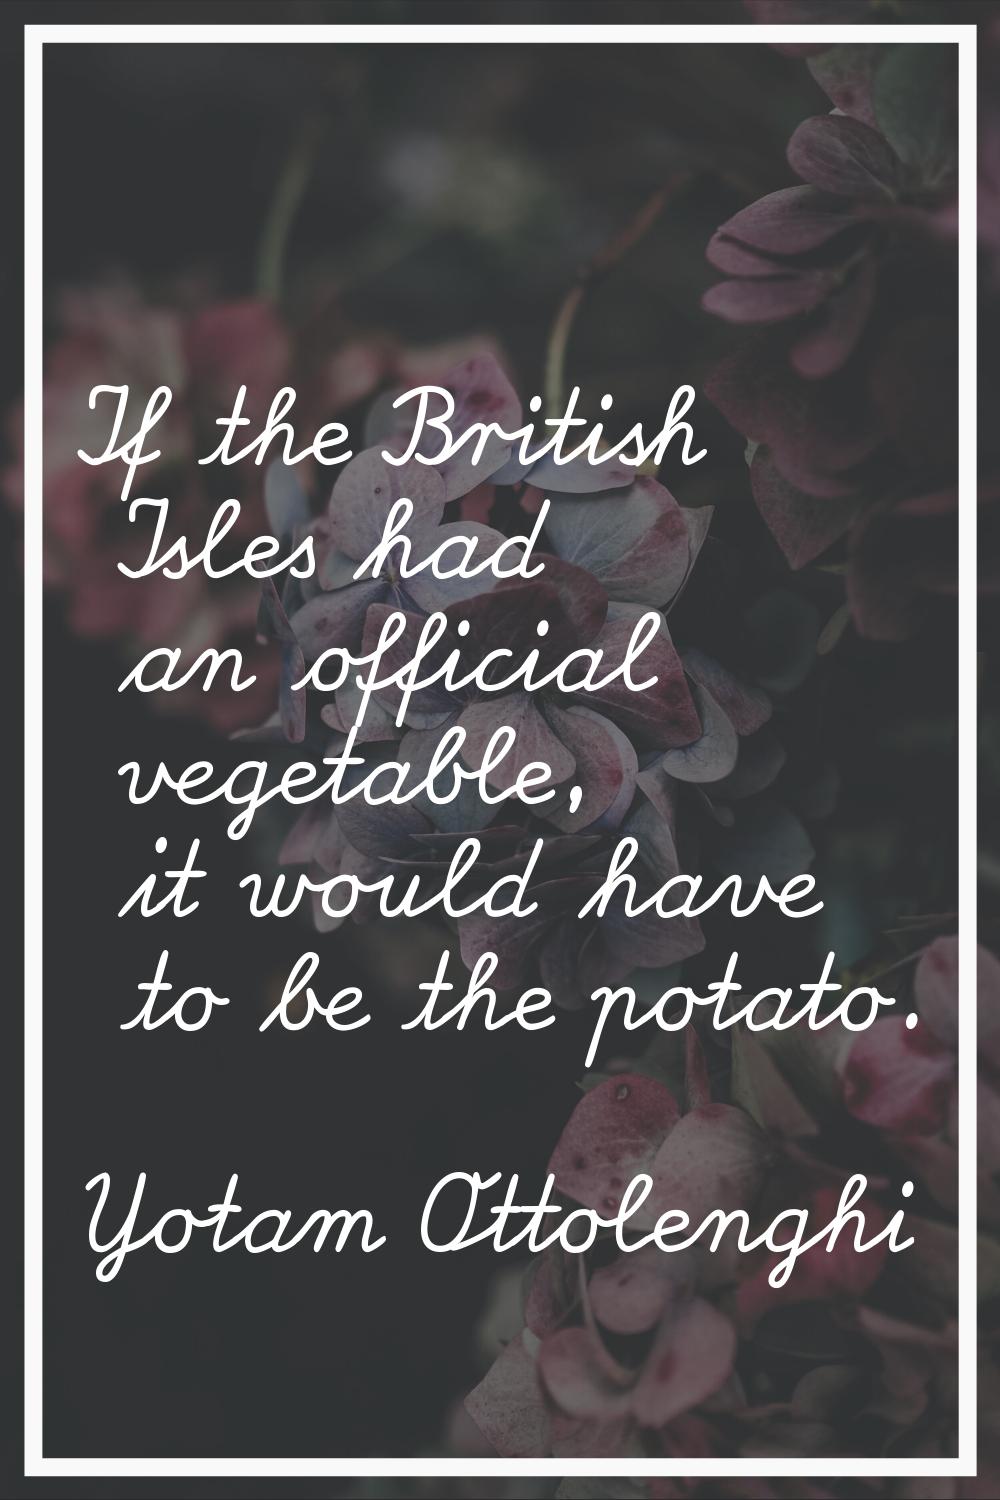 If the British Isles had an official vegetable, it would have to be the potato.